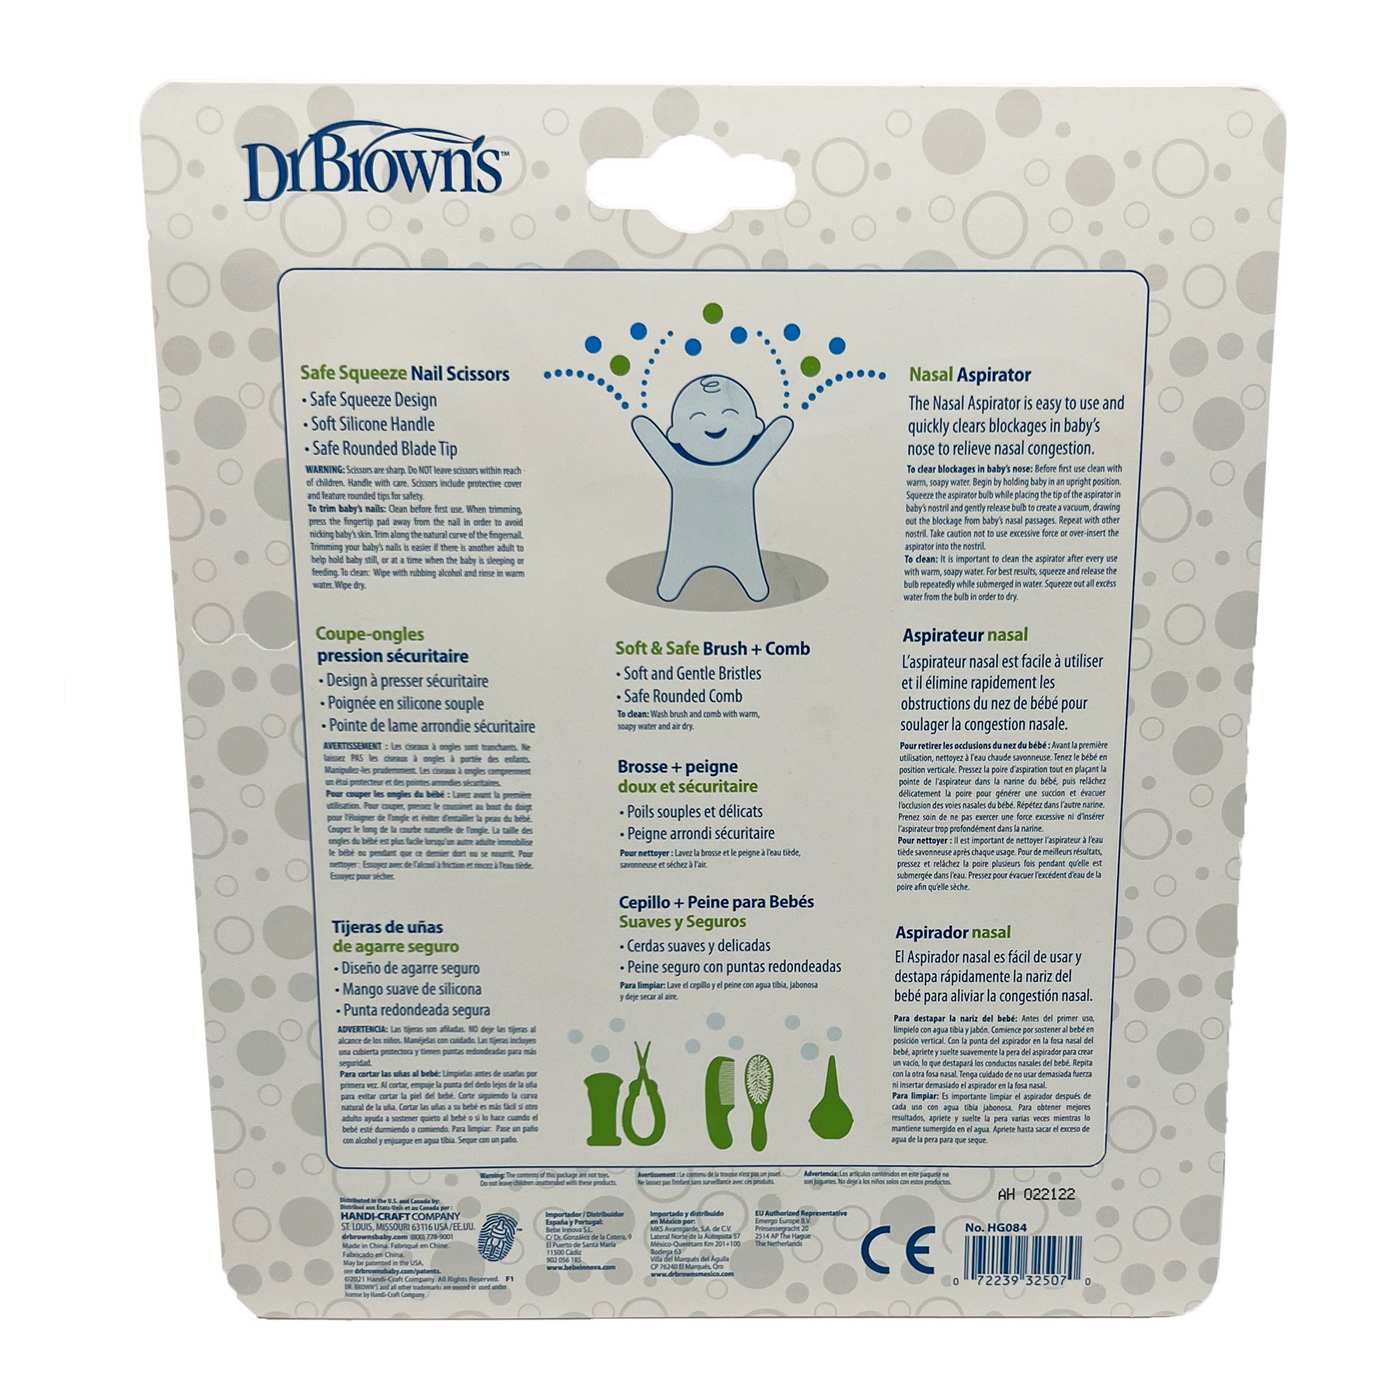 Dr. Brown’s Healthy Baby Essentials Care Kit for Infant & Baby